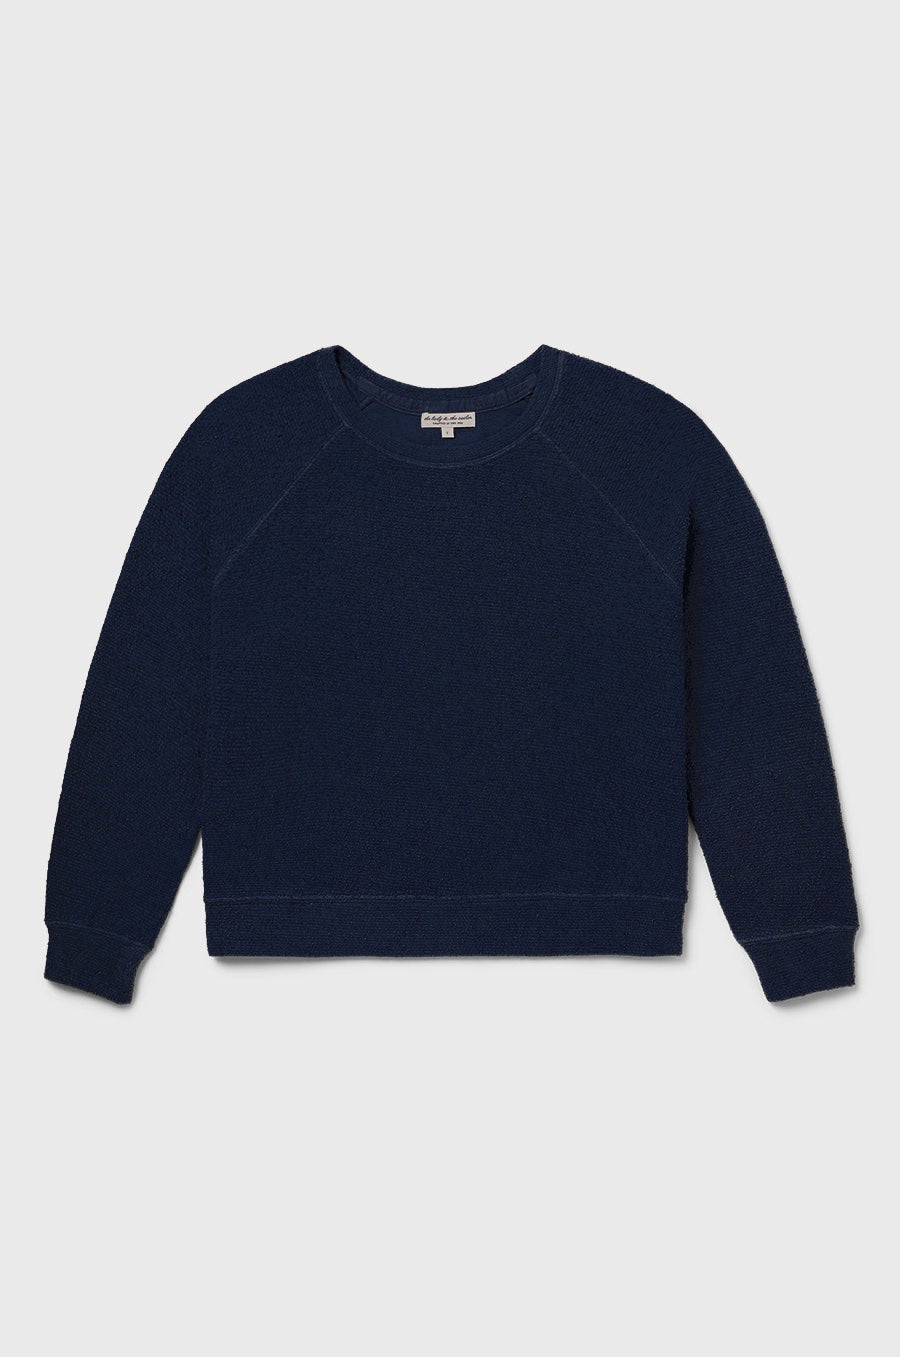 the lady & the sailor Brentwood Sweatshirt in Navy Boucle.